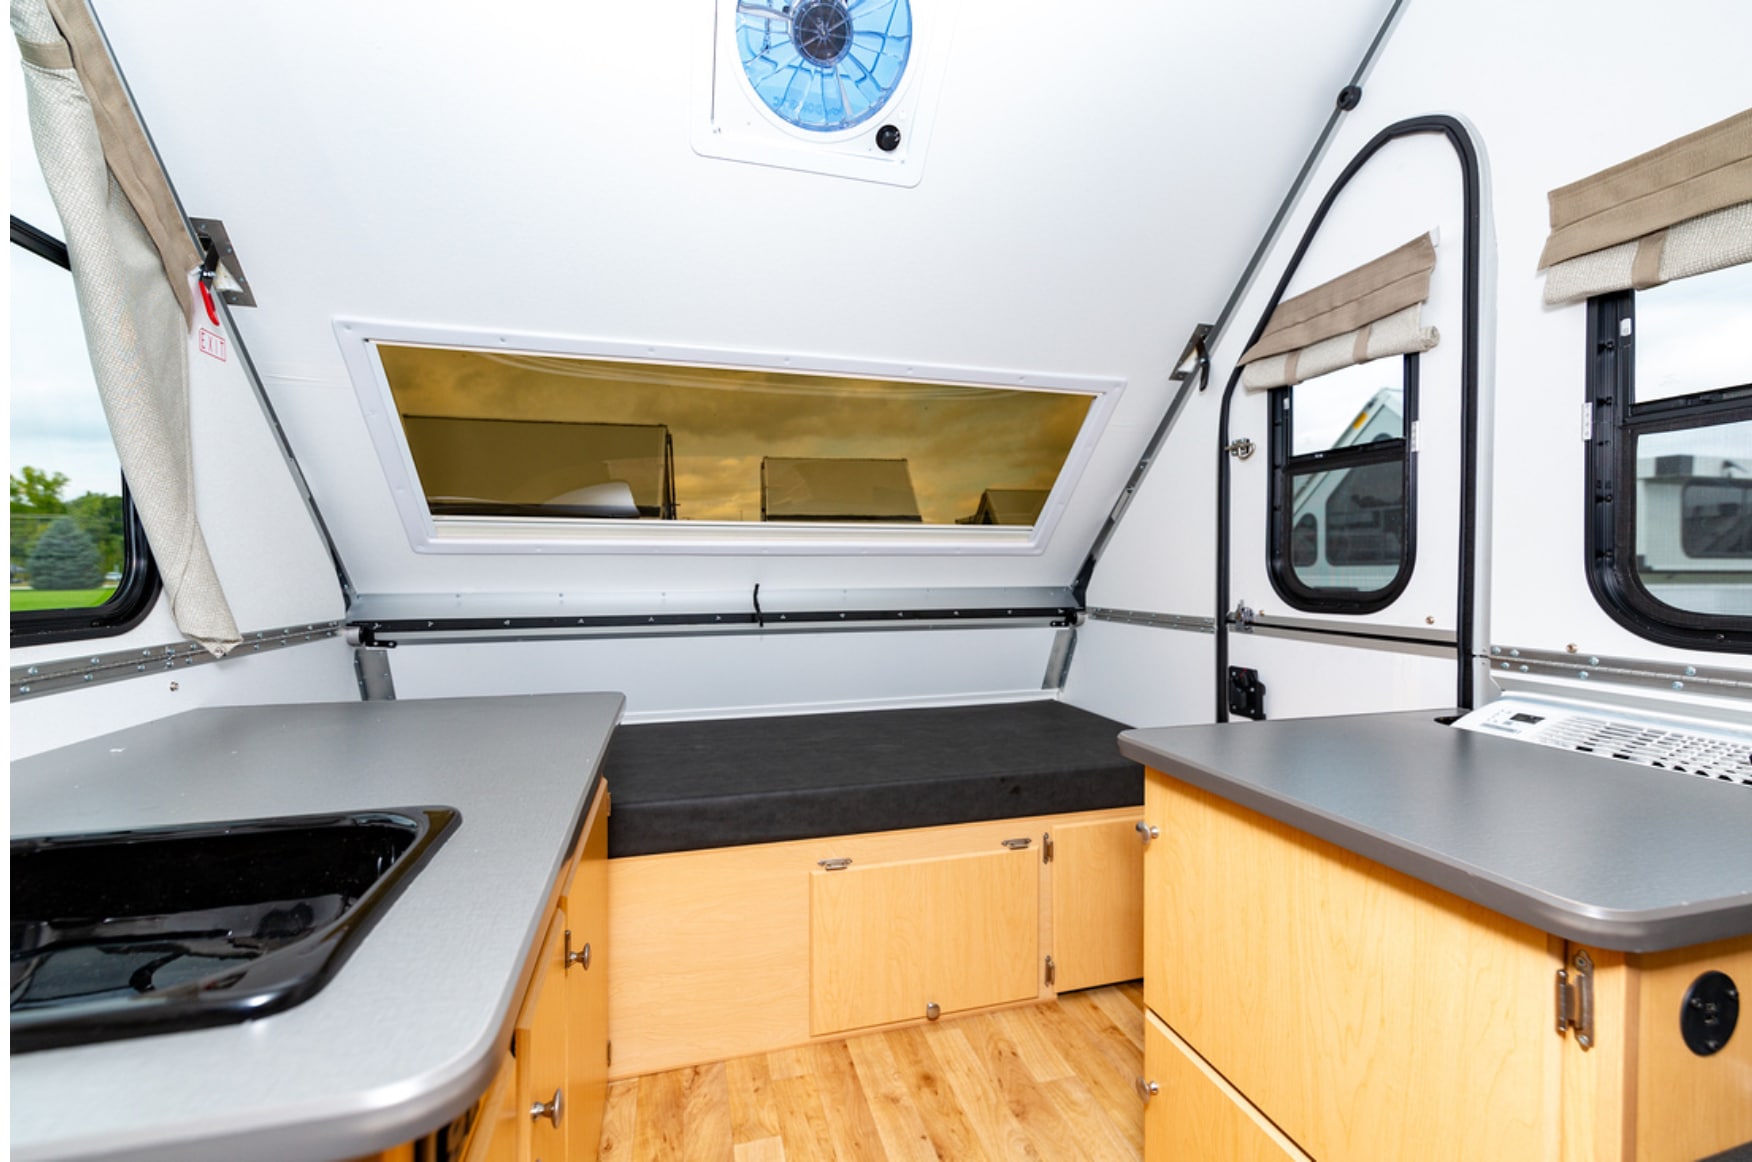 The interior of an rv with a stove and sink.